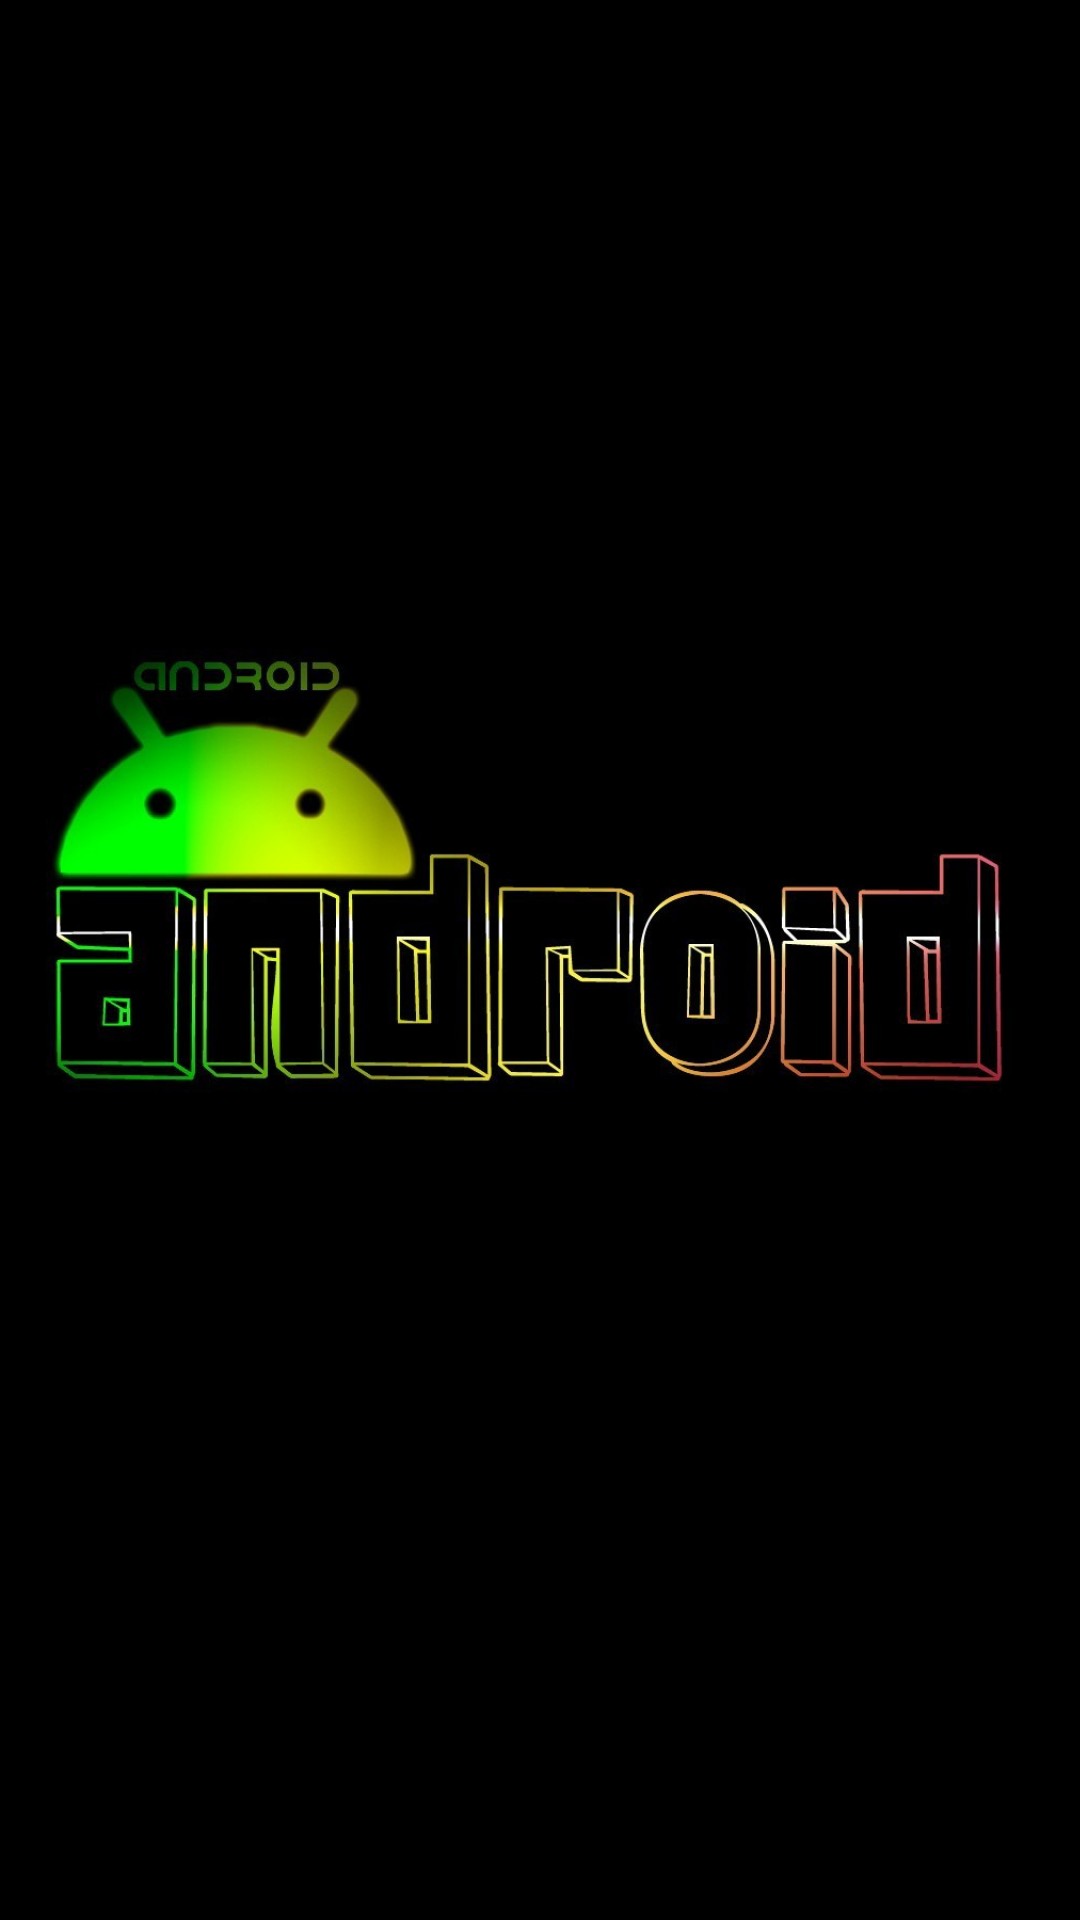 HD Android Logo Wallpaper For Mobile